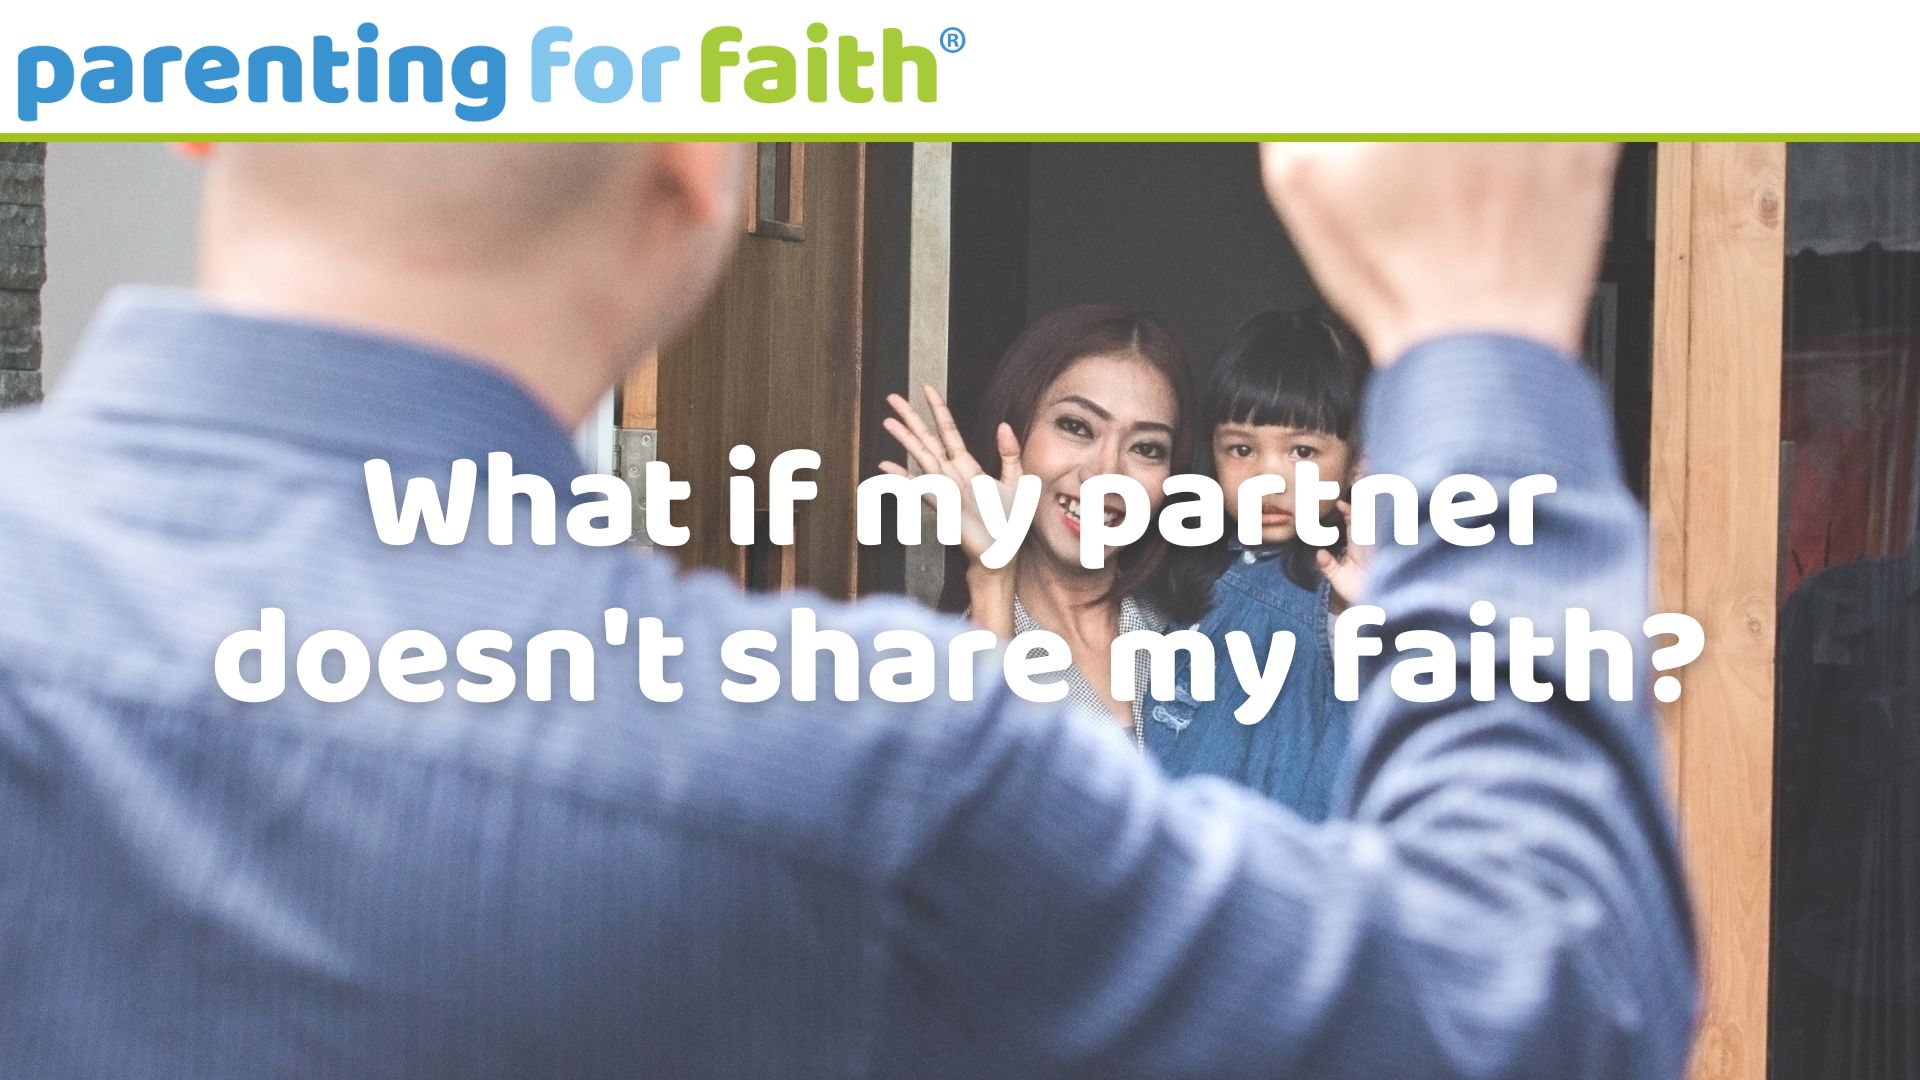 What if my partner doesn't share my faith image credit Odua Images